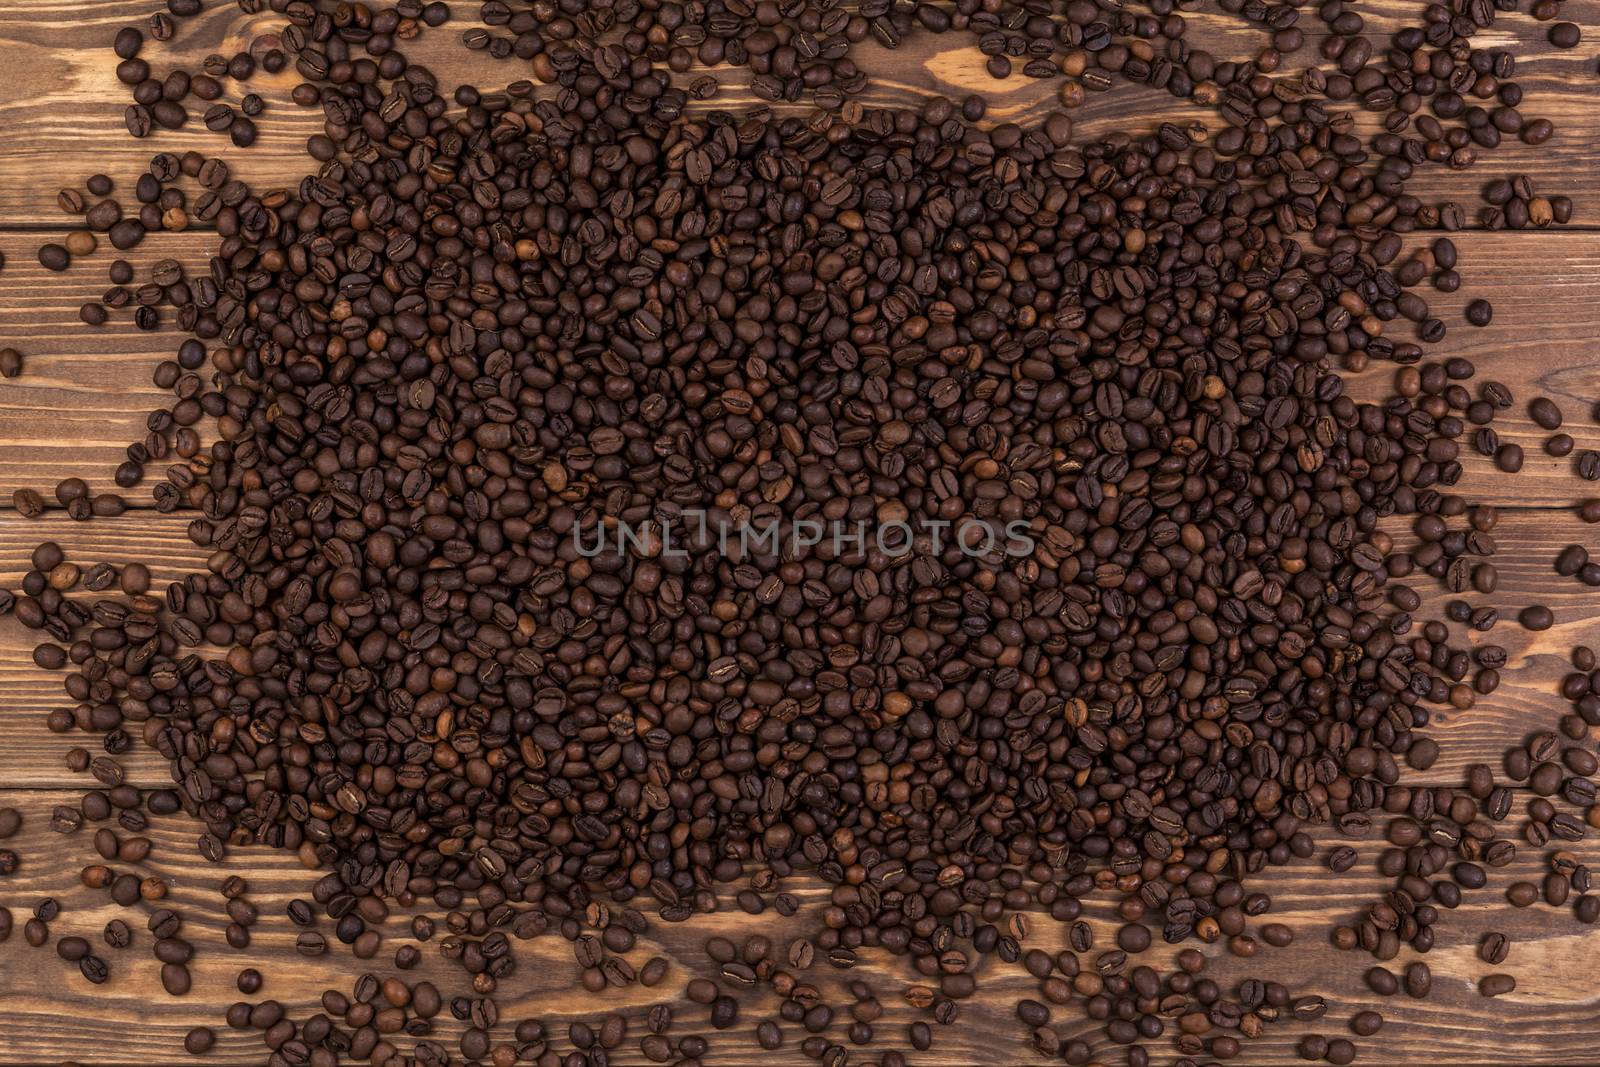 Coffee beans on brown wooden background, coffee texture, top view by xamtiw